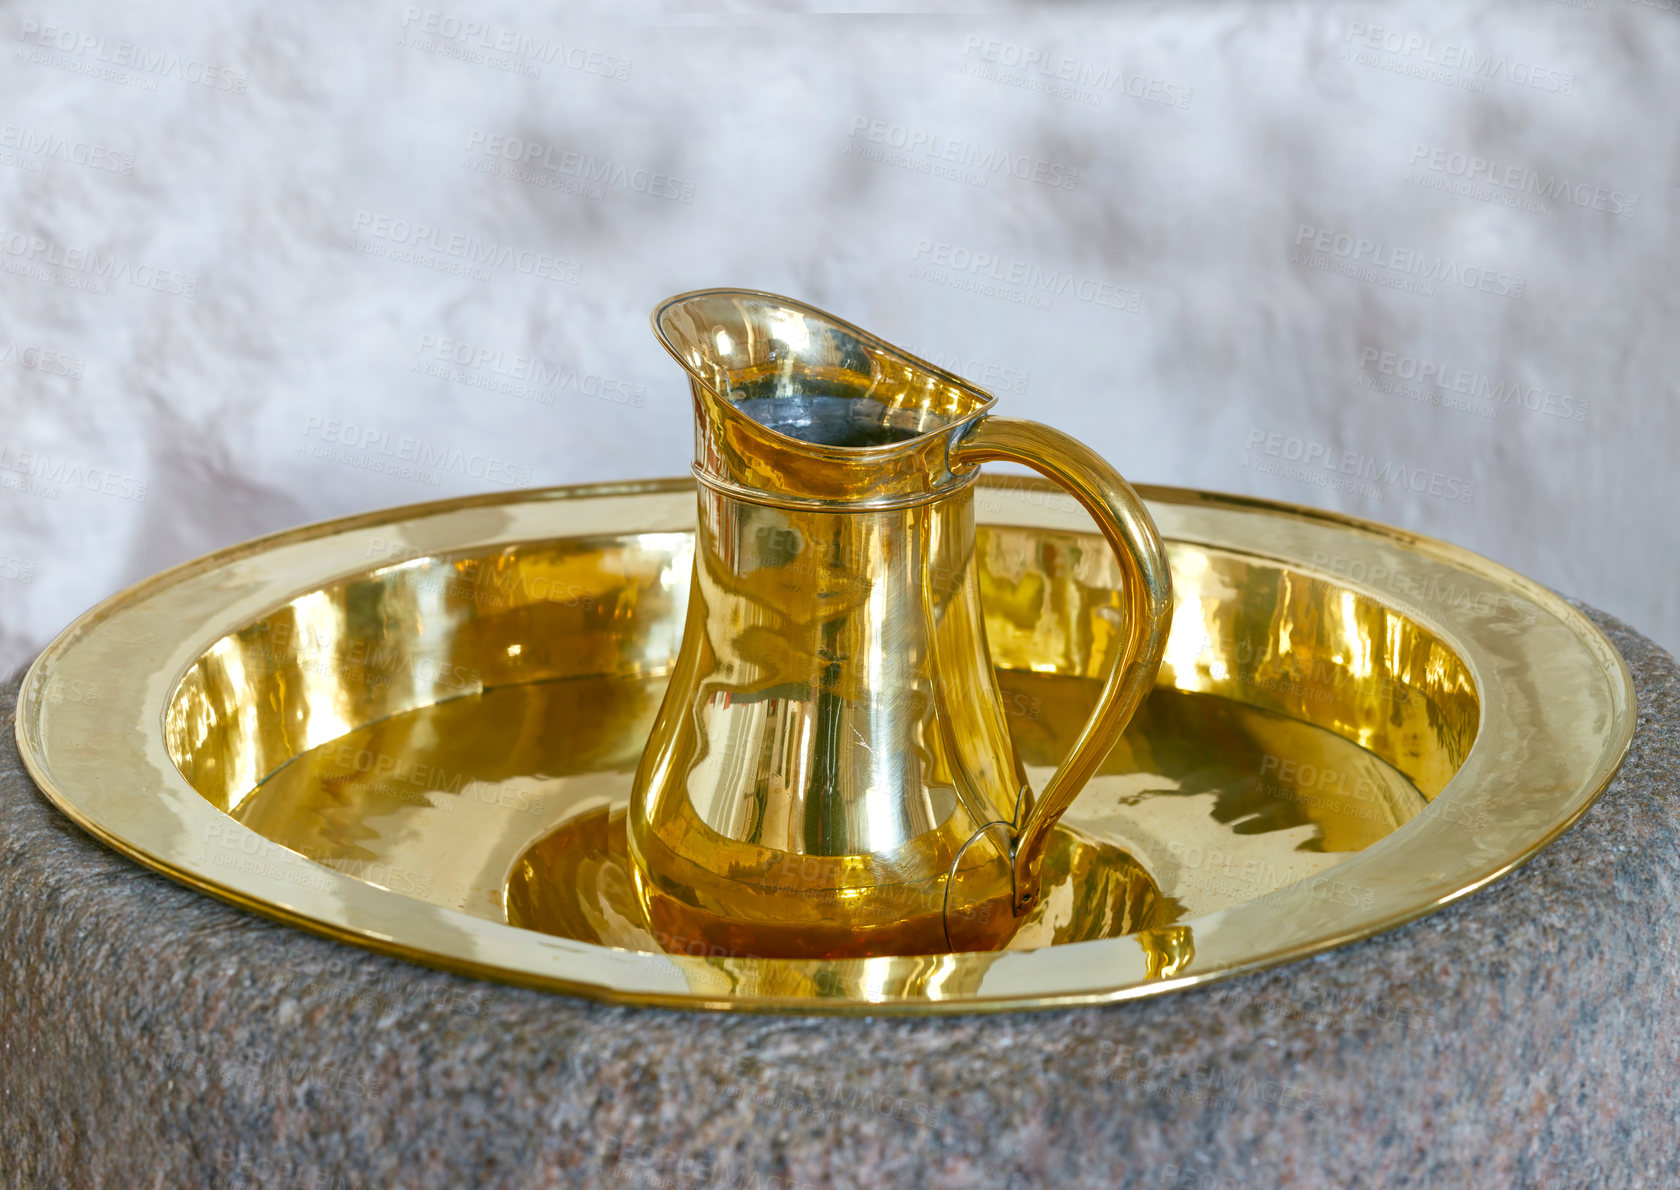 Buy stock photo Closeup of a gold baptism jug. Traditional water pouring cup used as a sacred tool for christening or naming ceremony at church. A holy baptismal font or religious object used in the Christian faith